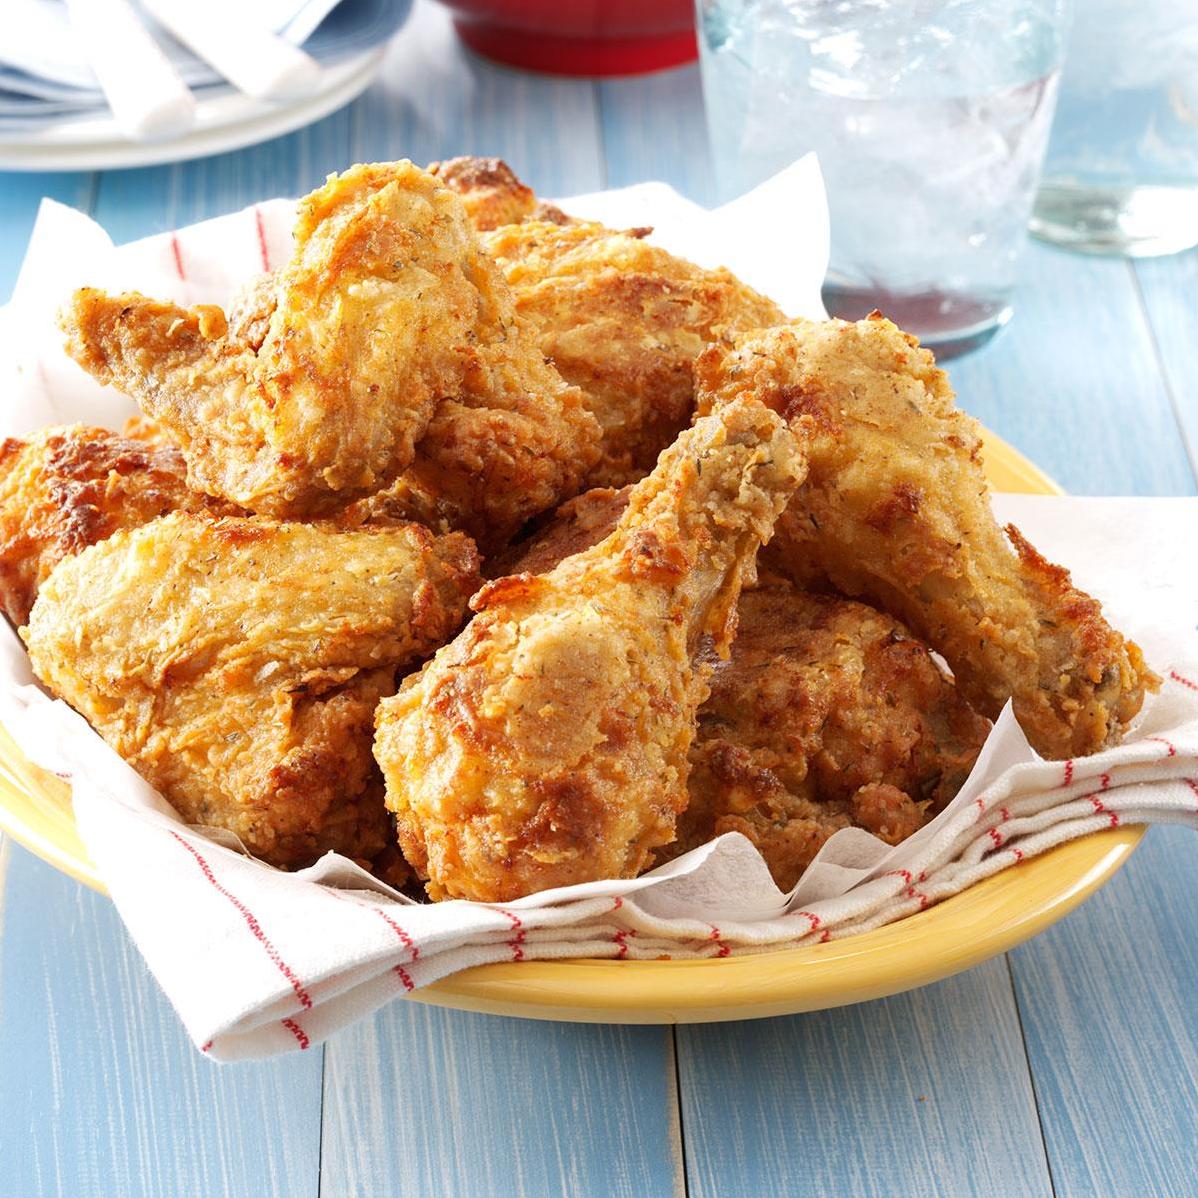  Golden brown and crispy, this Southern fried chicken is a crowd-pleaser.